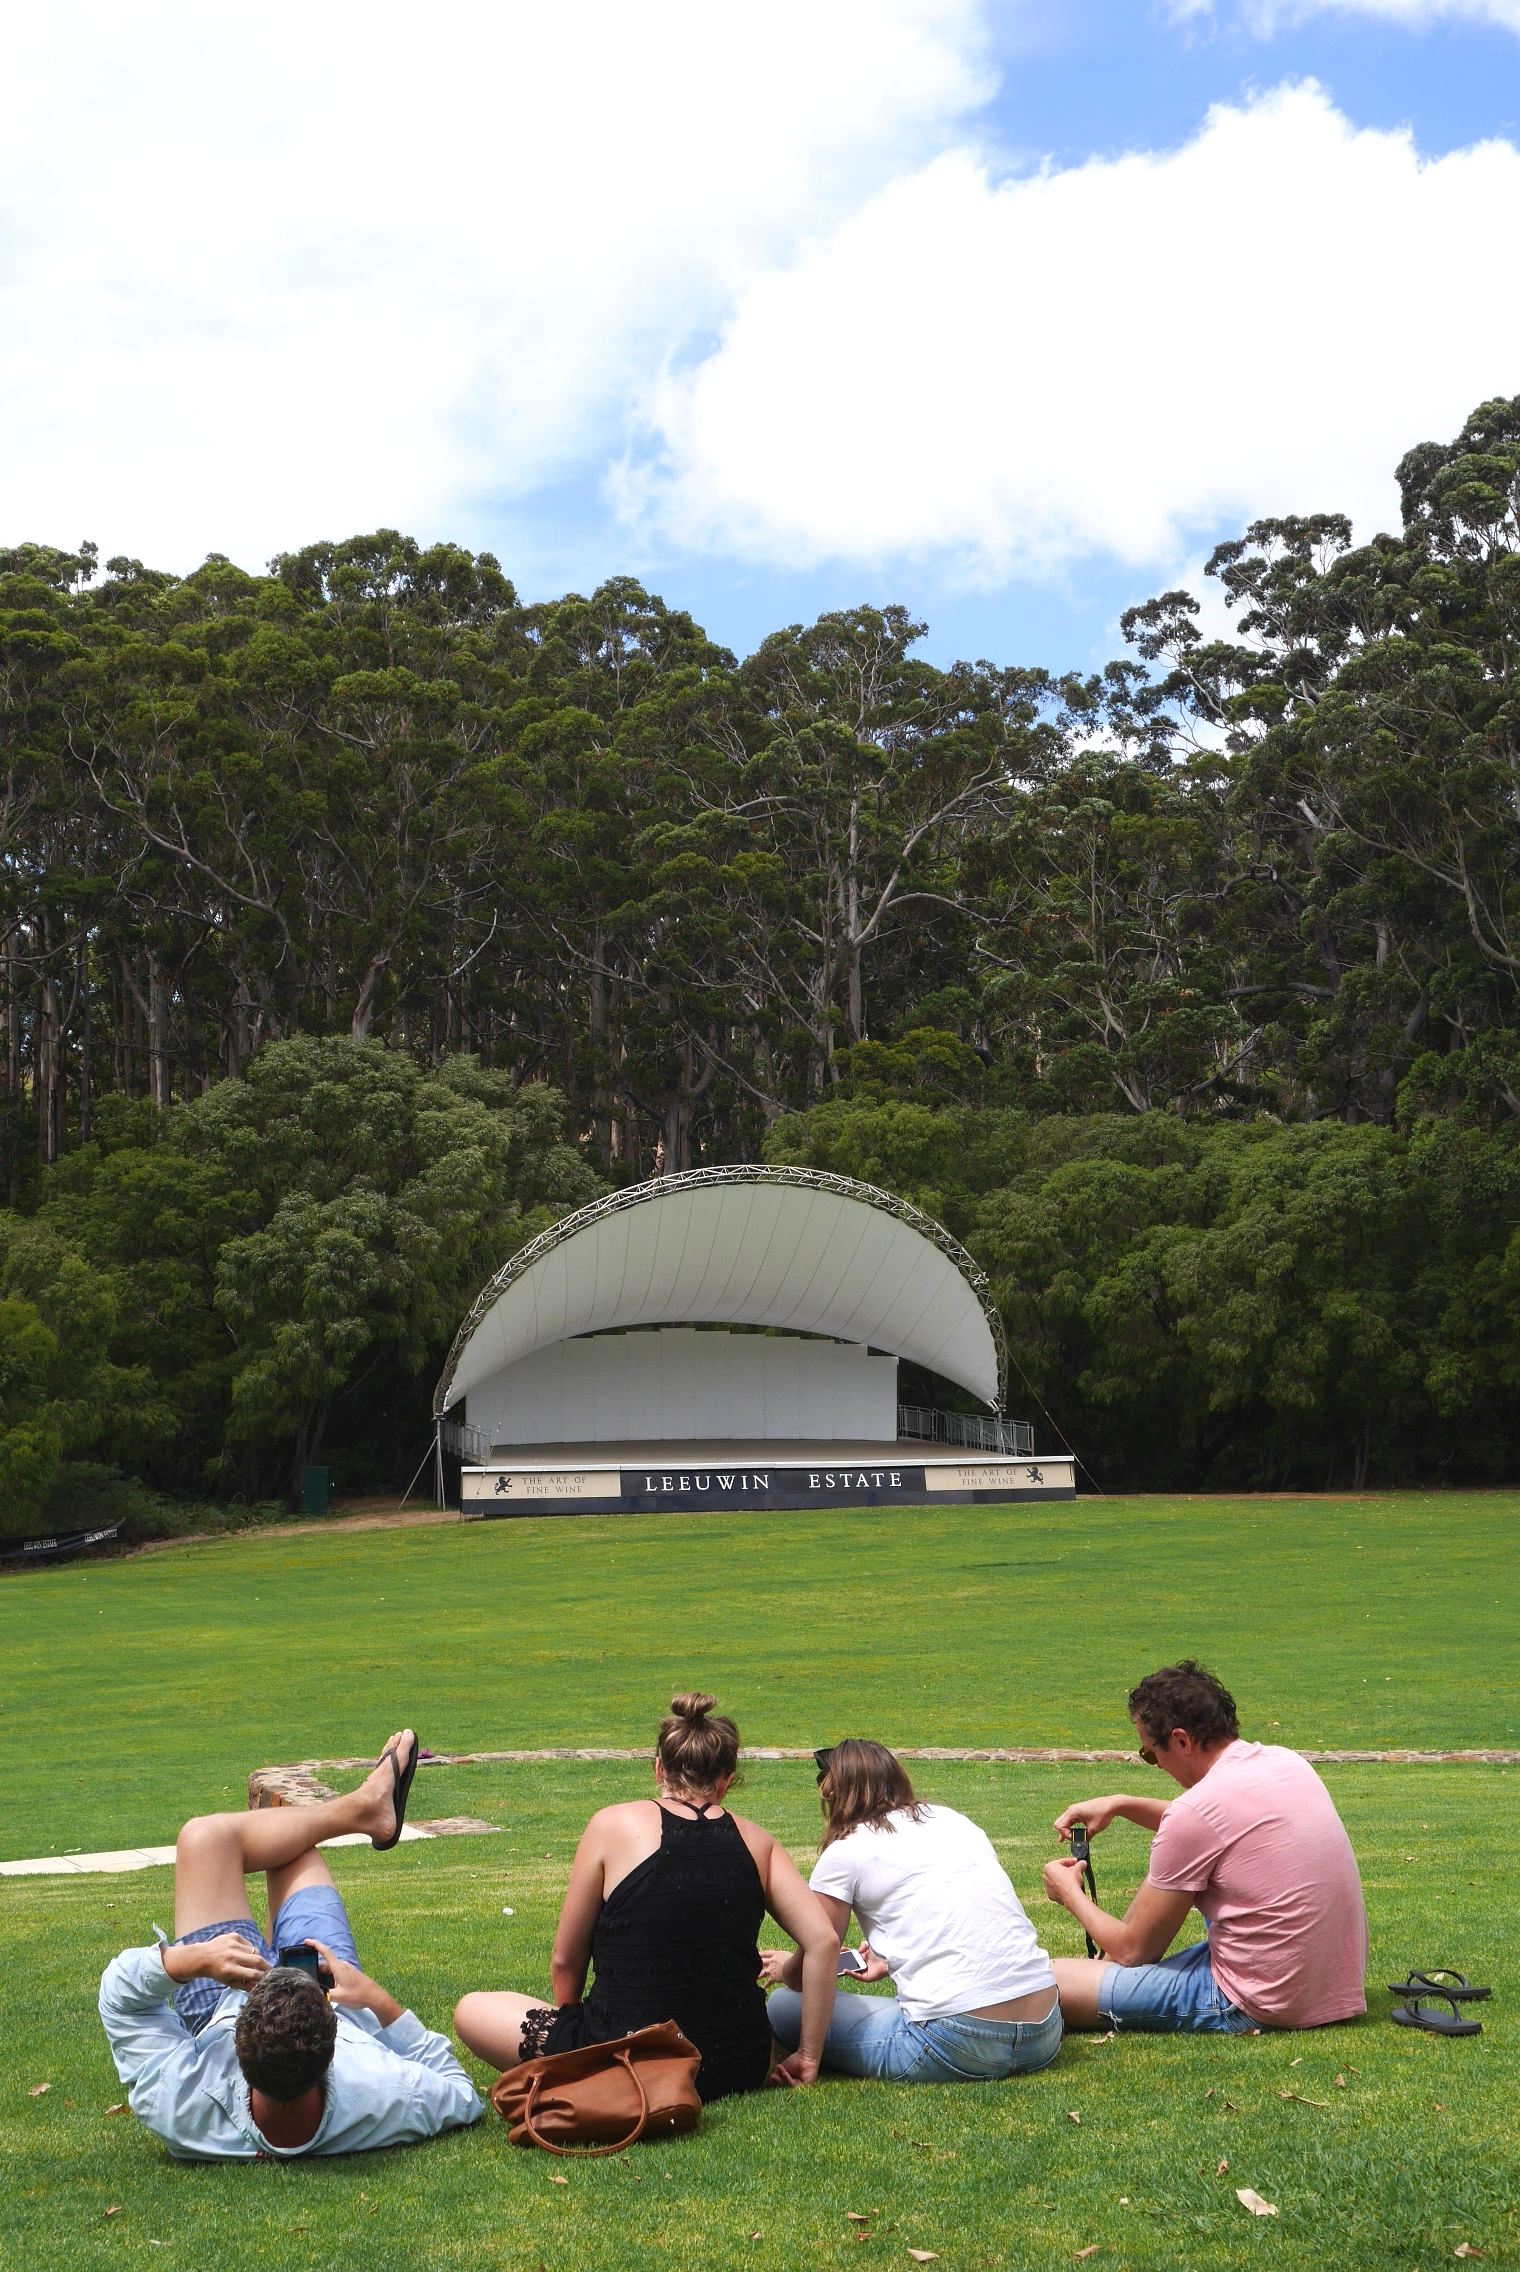 Lazing on the lawn and Leeuwin's iconic show stage in background